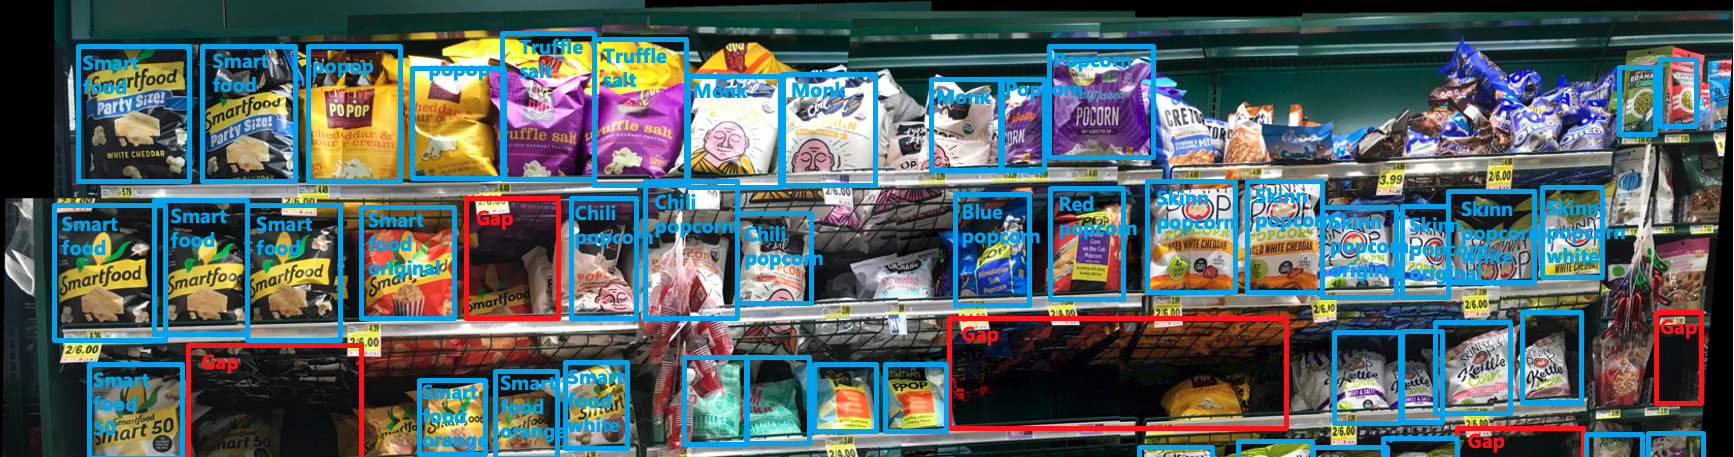 Photo of a retail shelf with product names and gaps highlighted with rectangles.